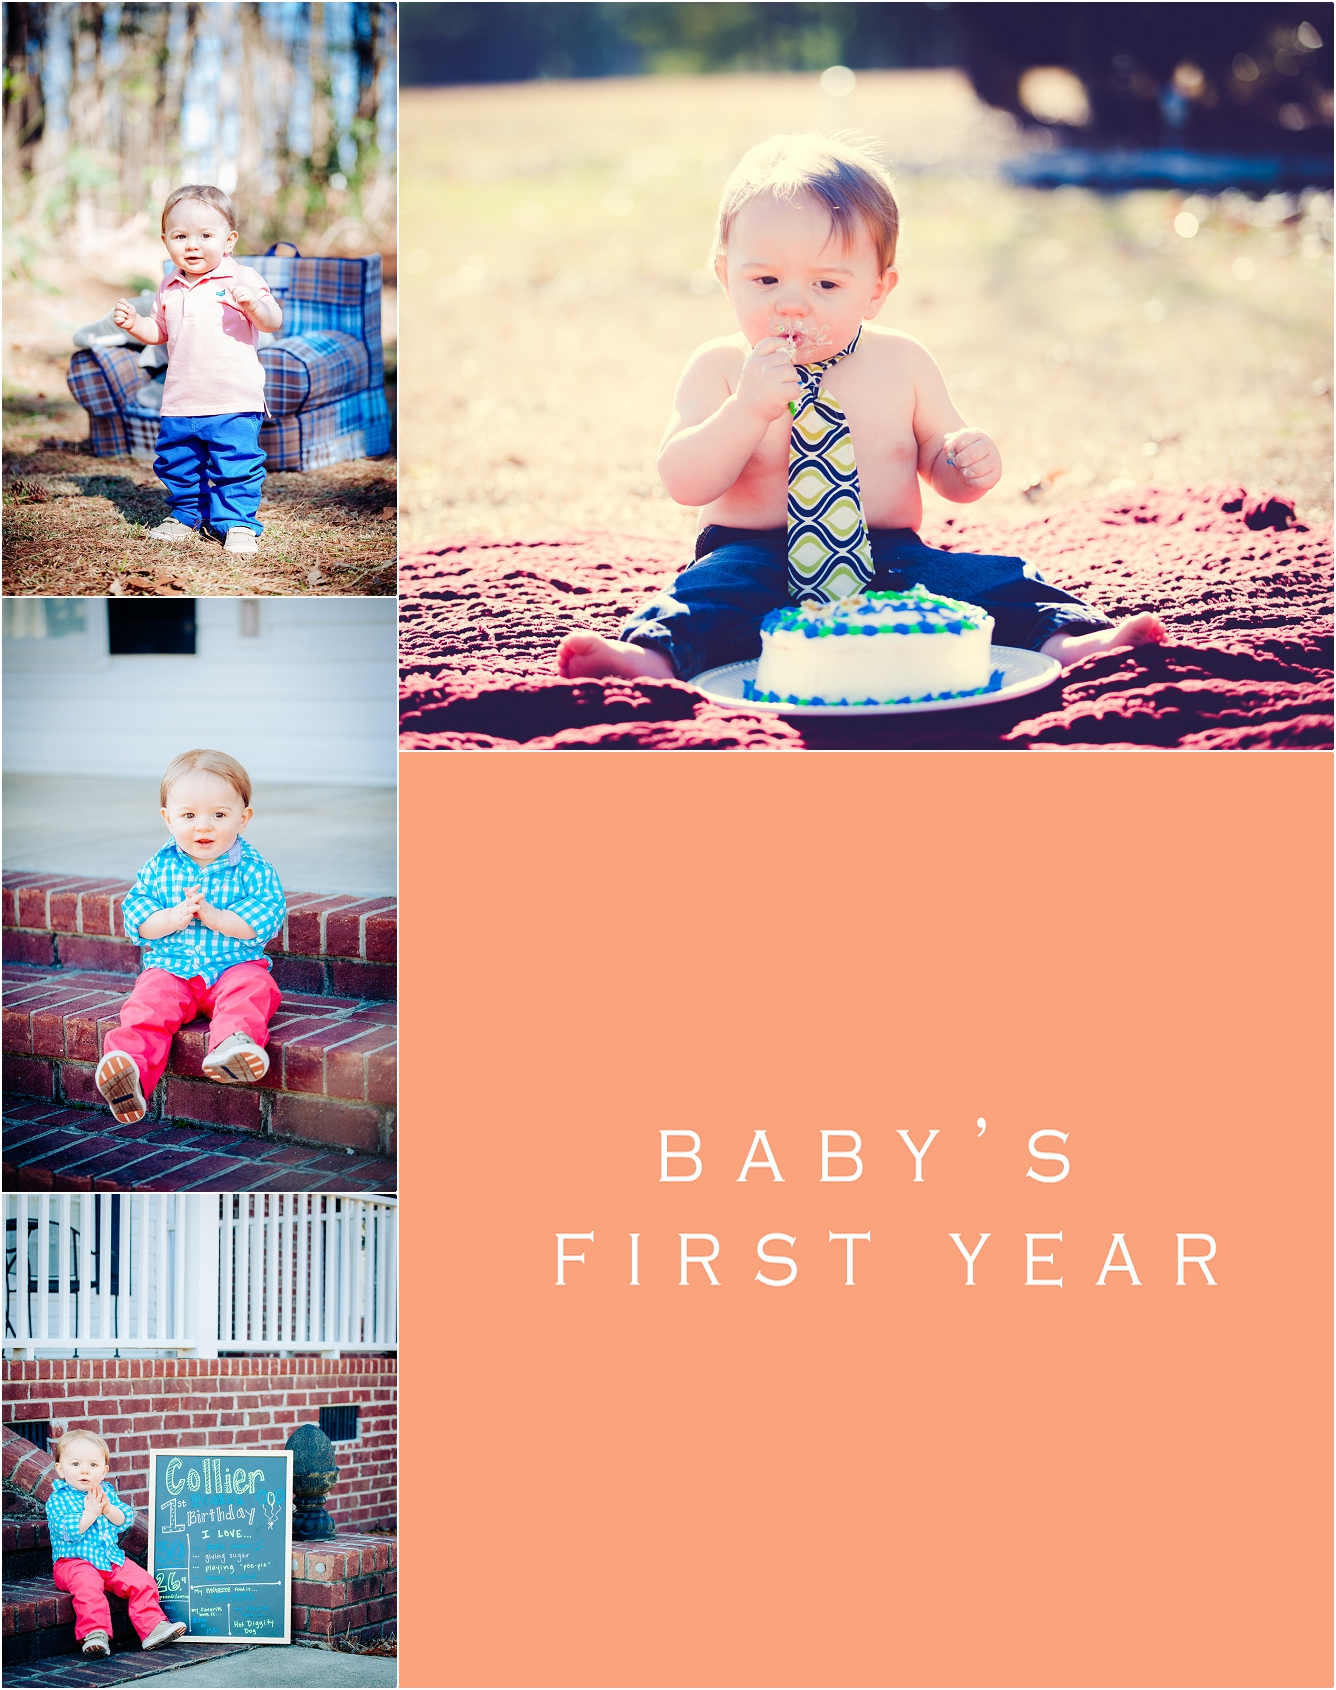 "Baby's First Year"